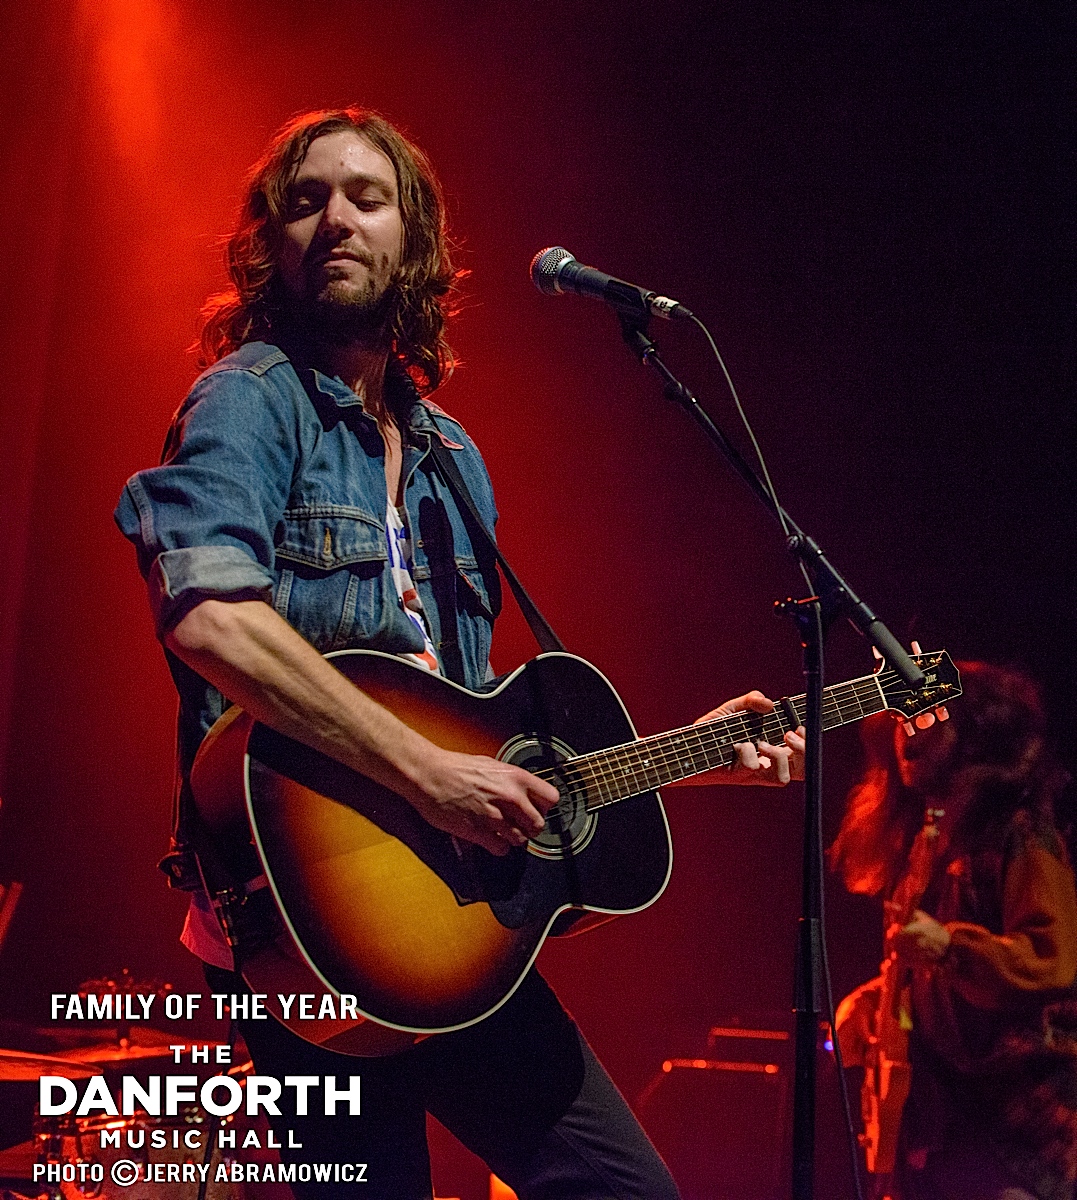 20131004 Family of the Year at The Danforth Music Hall Toronto 0249